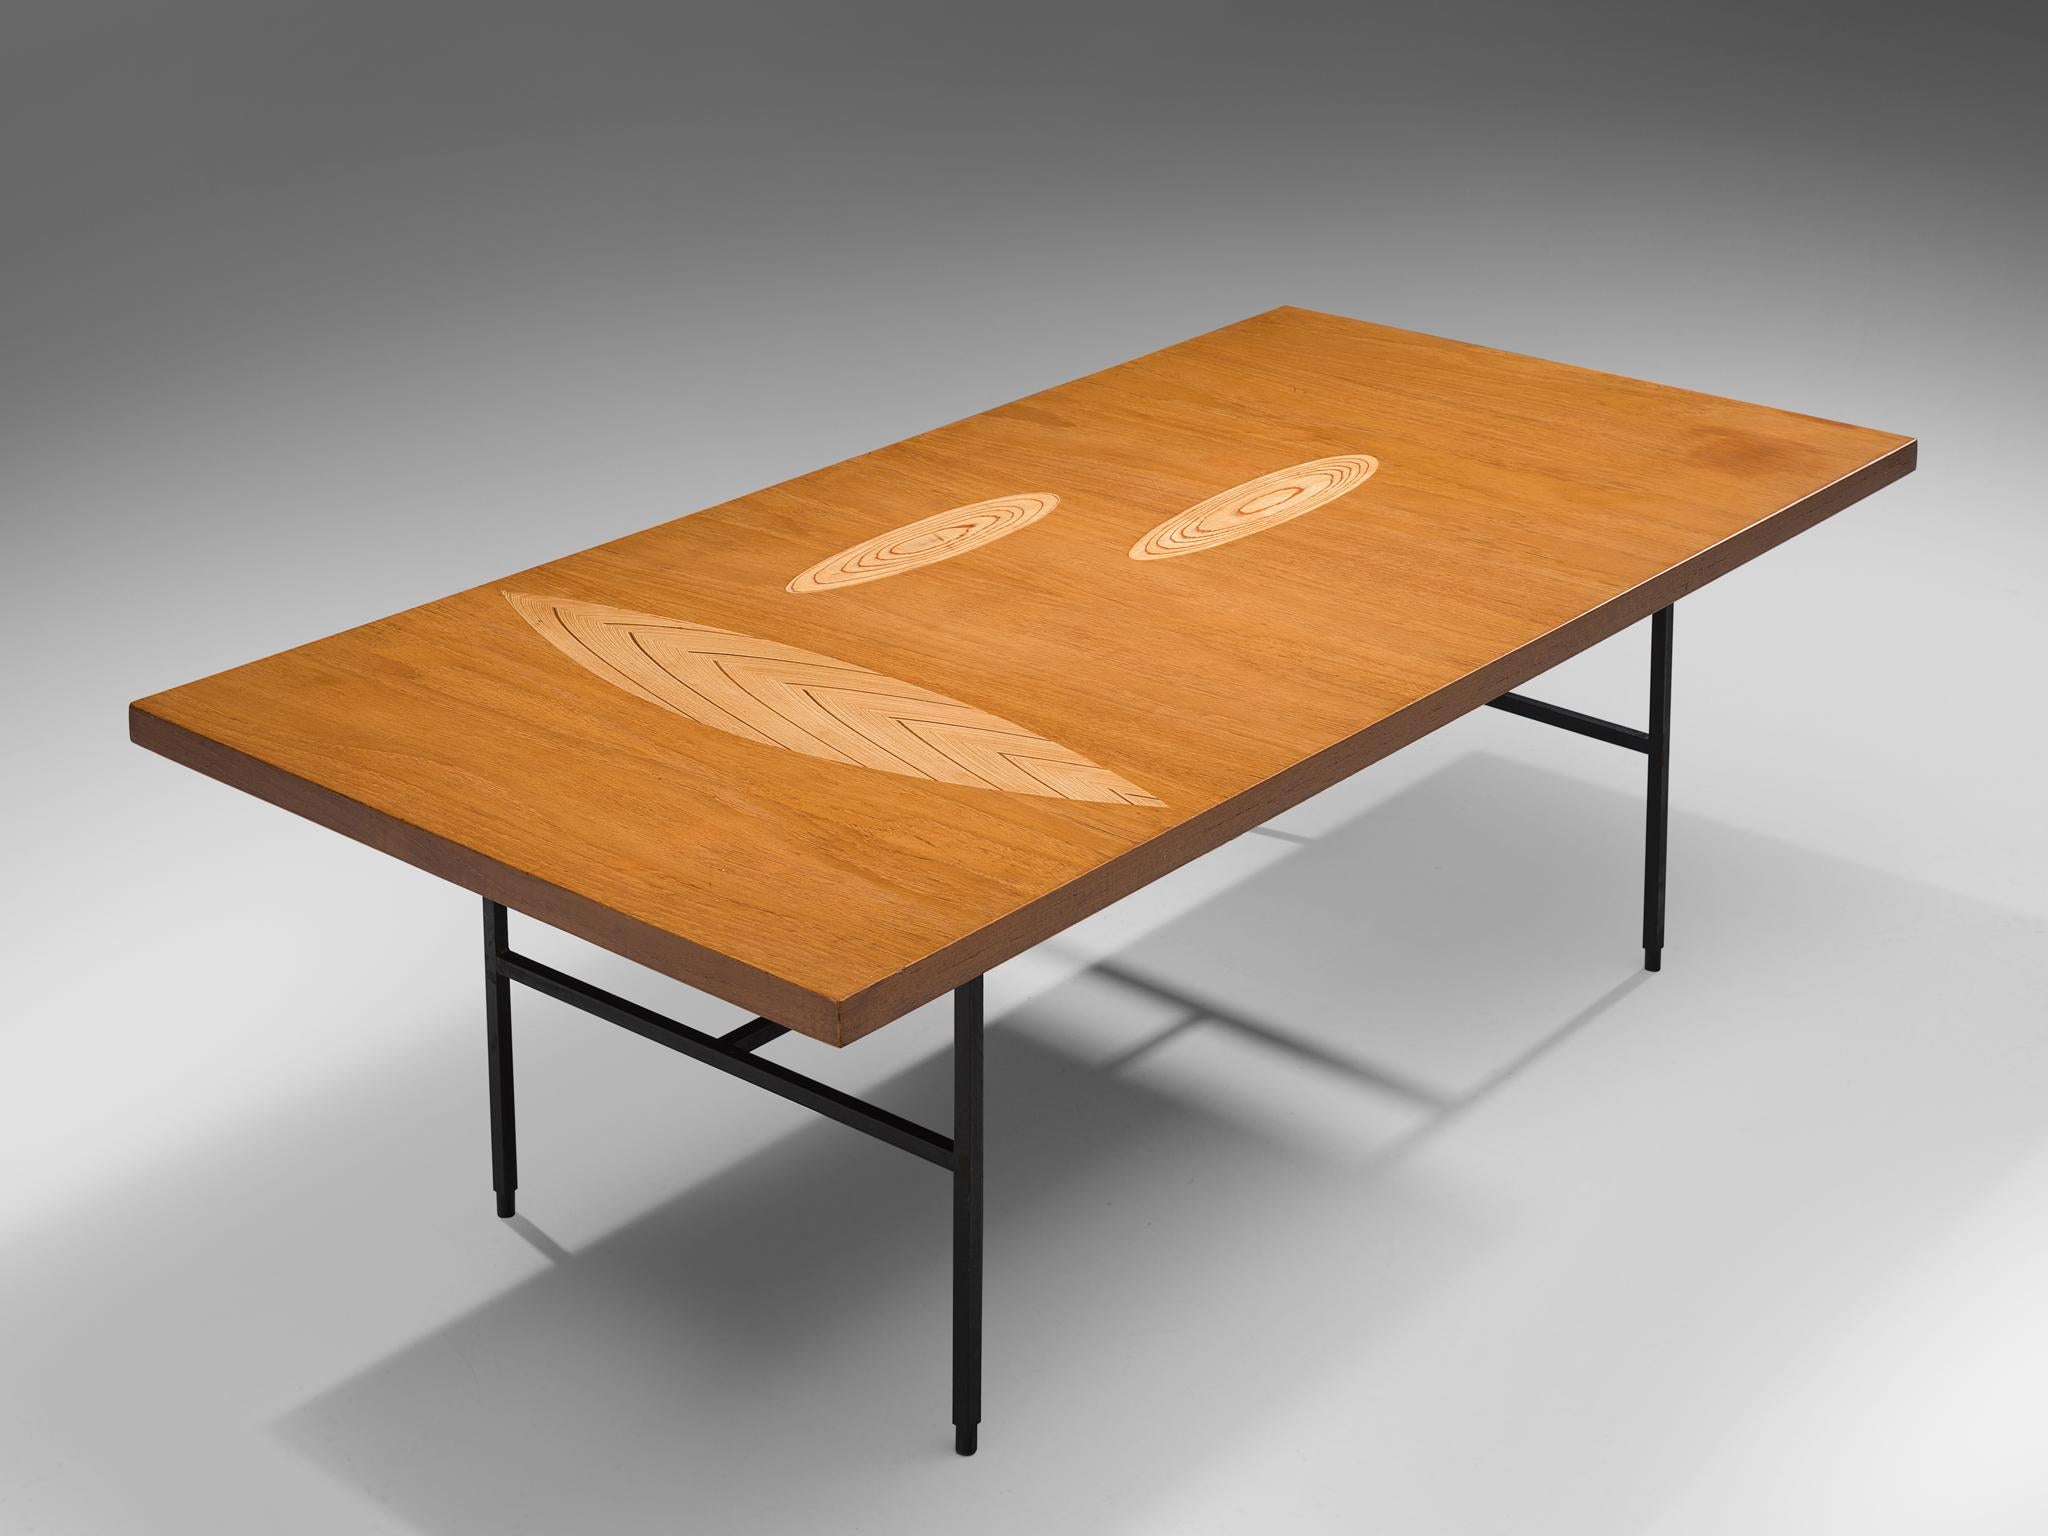 Tapio Wirkkala for Asko, cocktail table in birchwood and metal, Finland, 1960s. 

Coffee table with wooden inlay ornaments designed by Tapio Wirkala. The table is produced by Asko. This coffee table is one of Wirkkala's iconic furniture designs.